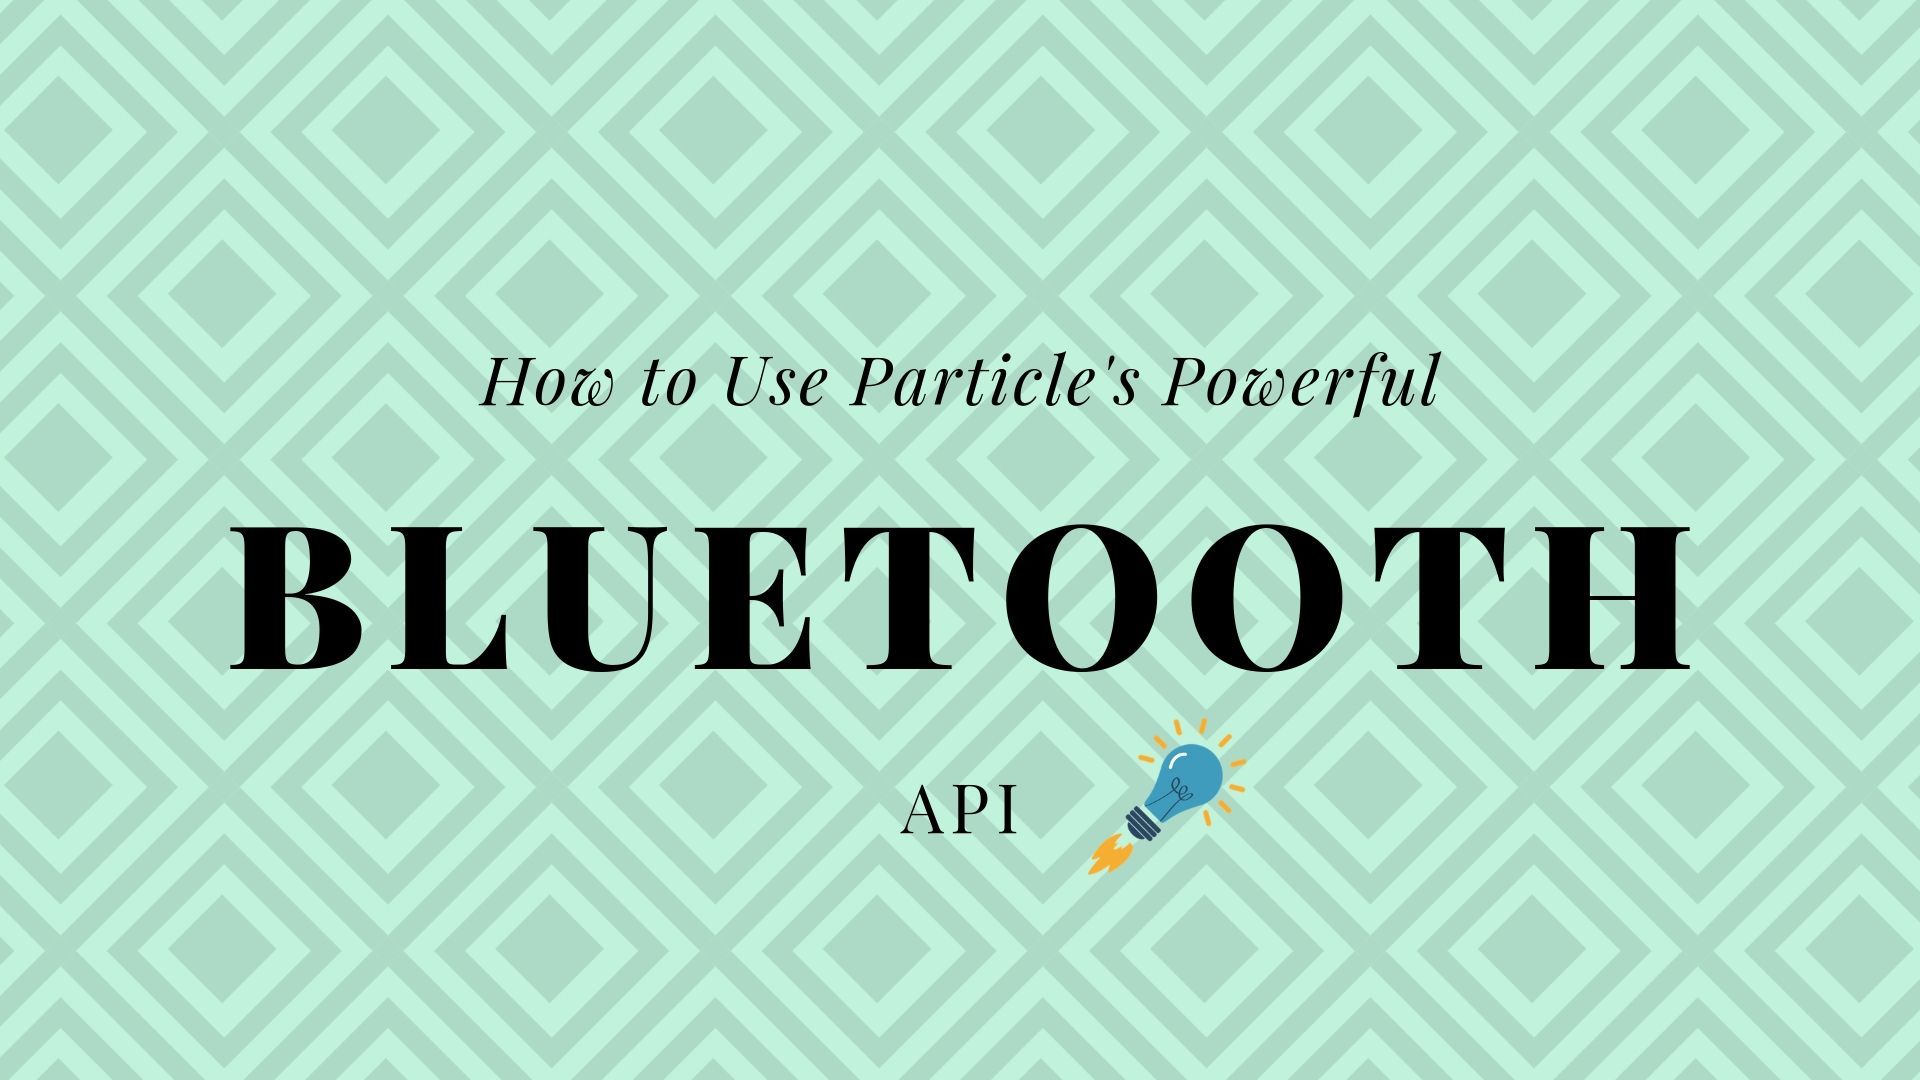 How to Use Particle's Powerful Bluetooth API